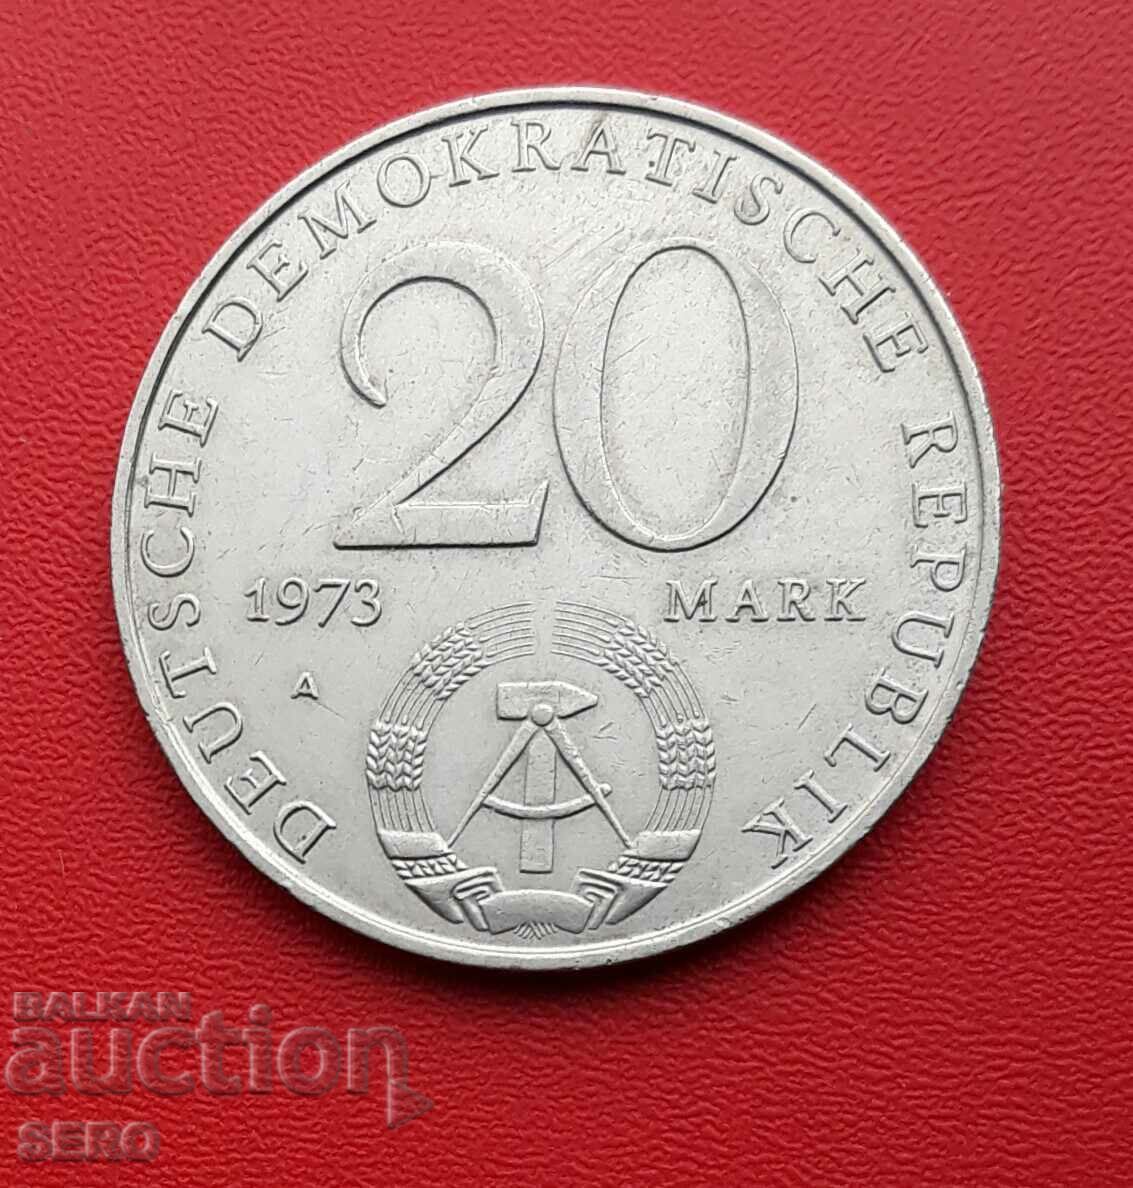 Germania-GDR-20 timbre 1973-Otto Grotewohl-politician